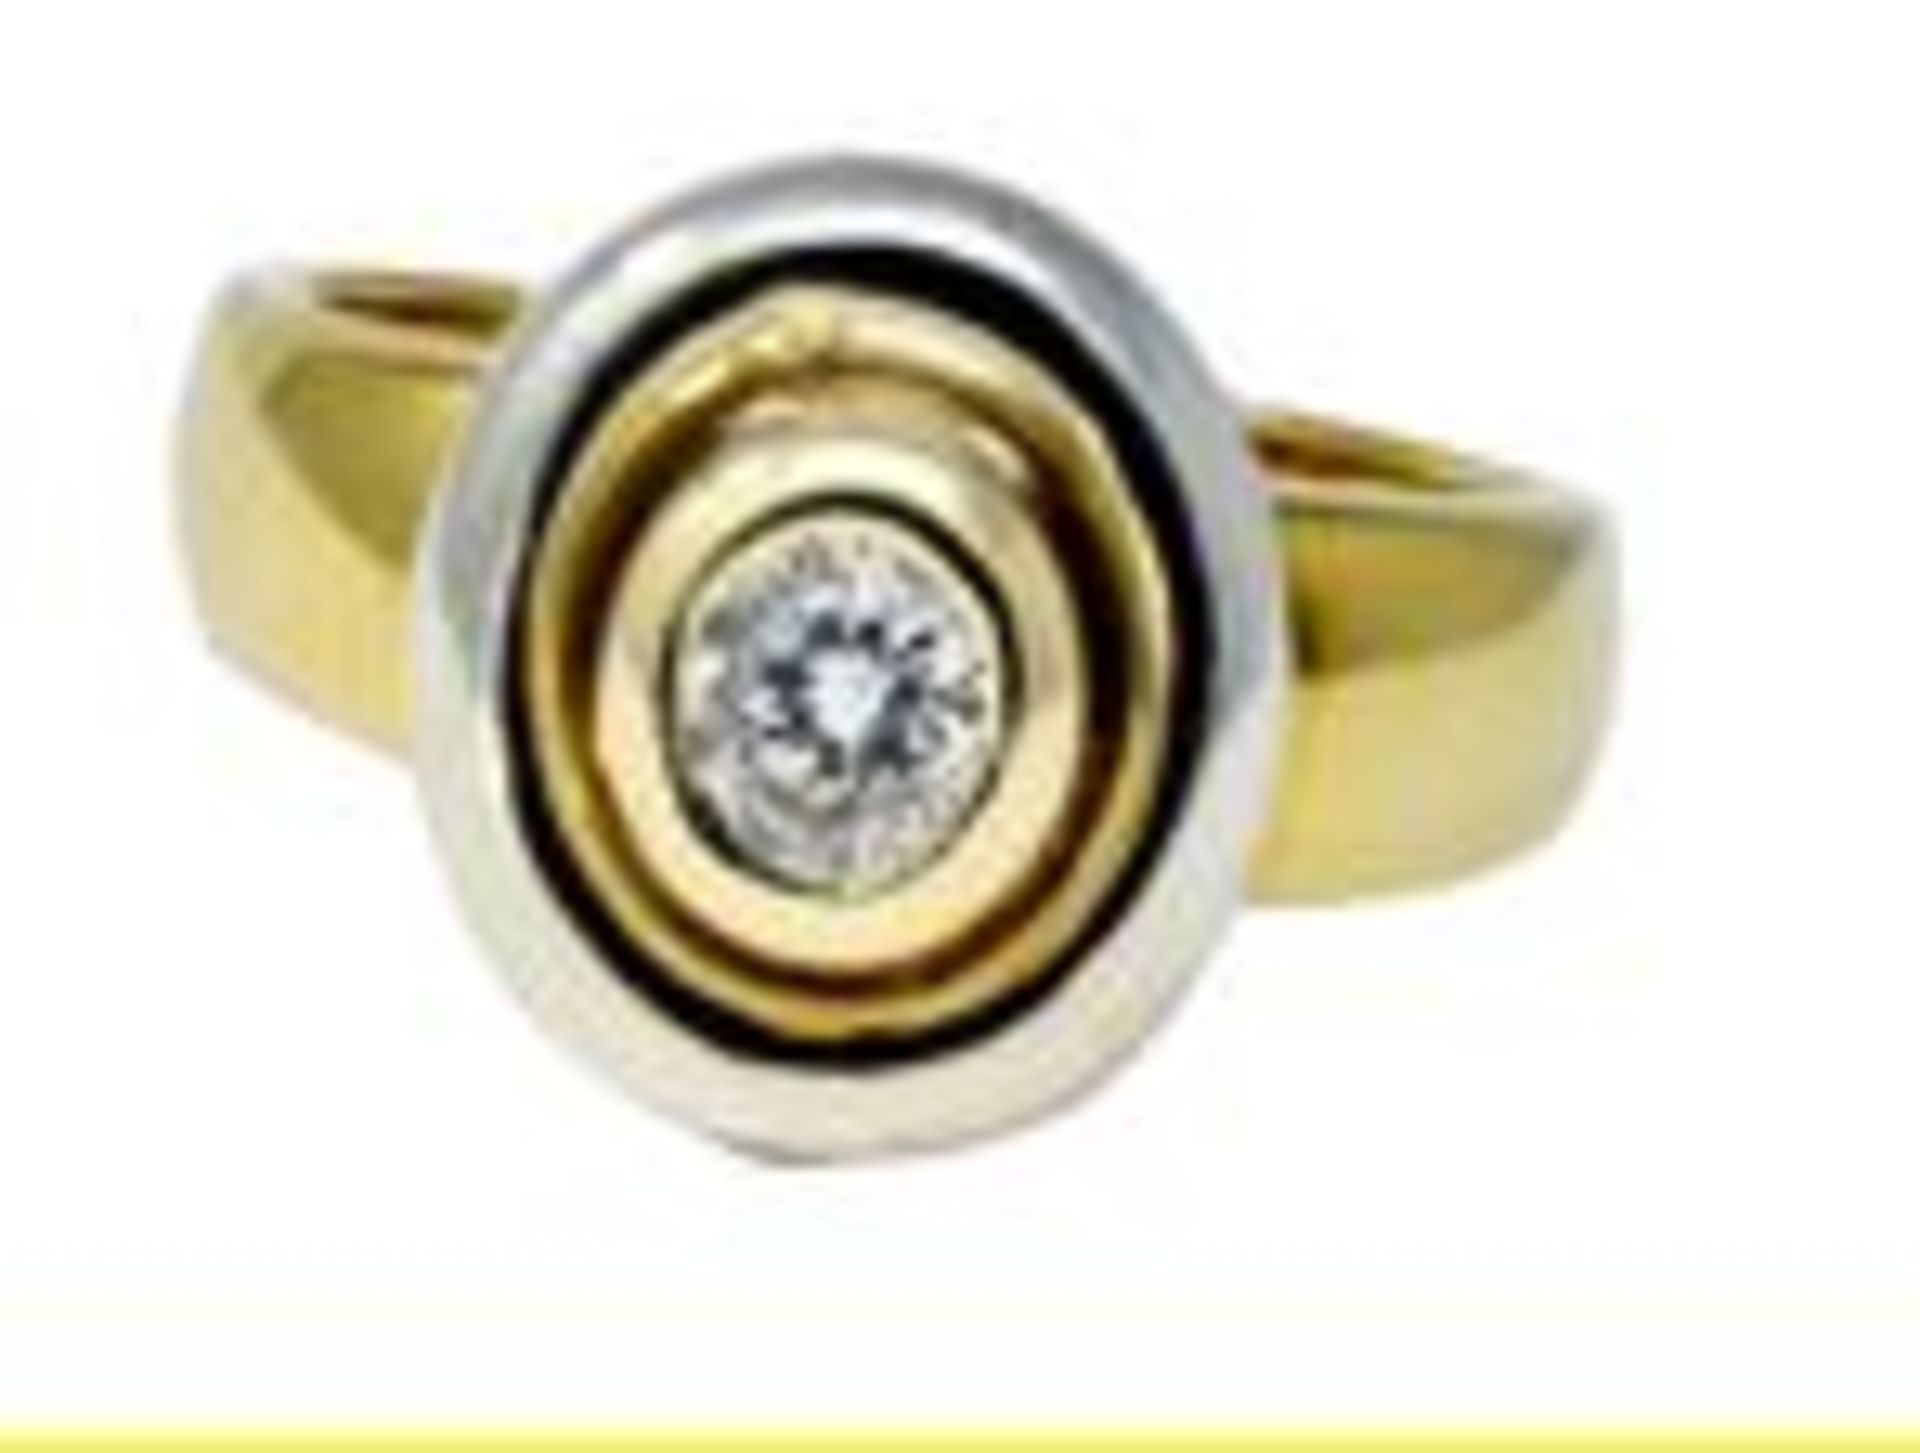 Two Tone Diamond Ring, 9ct Yellow/White Gold, Weight 5.21g, Diamond Weight 0.25ct, Colour H, Clarity